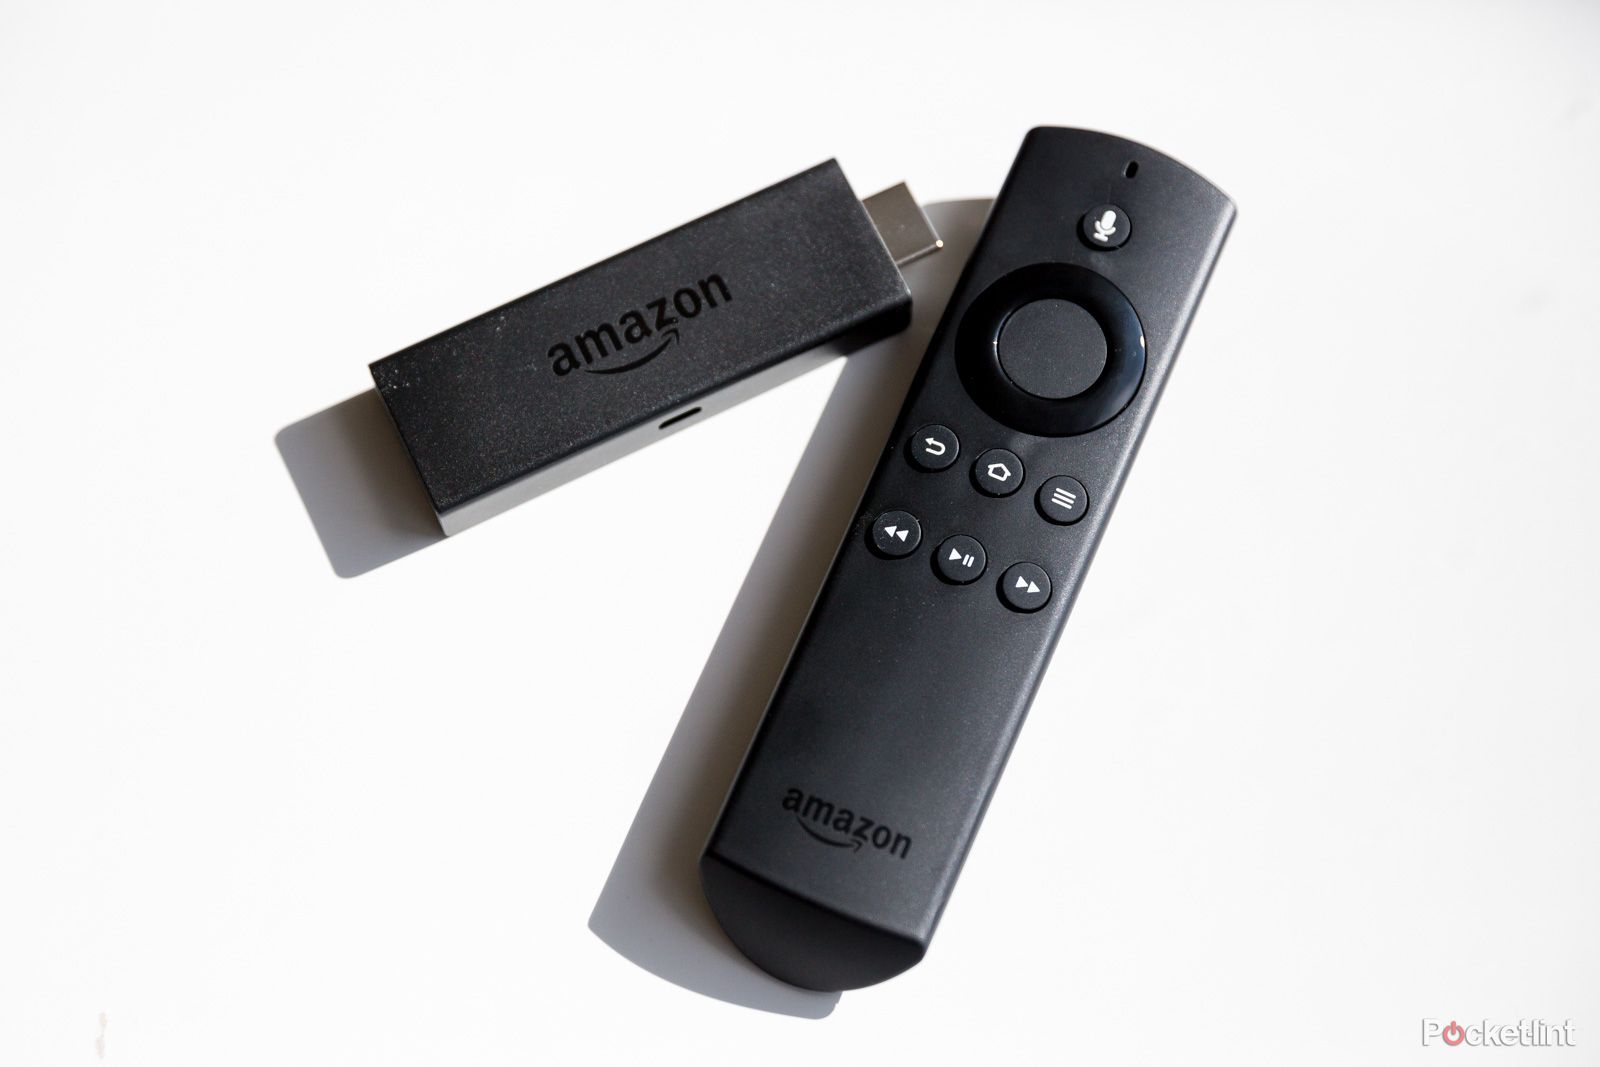 amazon fire tv stick with alexa voice remote review image 1